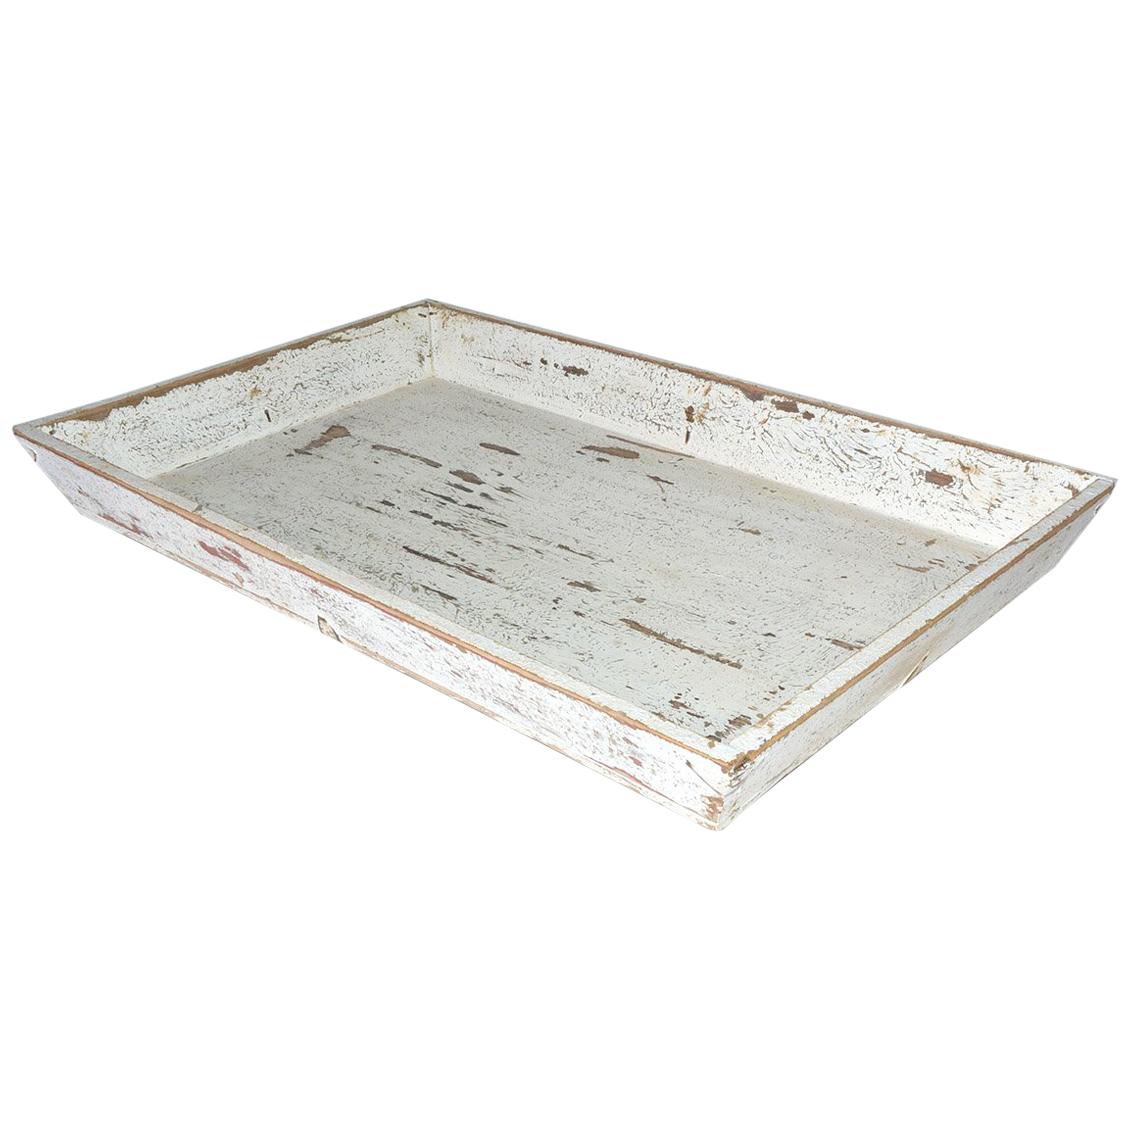 Rustic White Painted Provincial Style Chinese Tea Tray